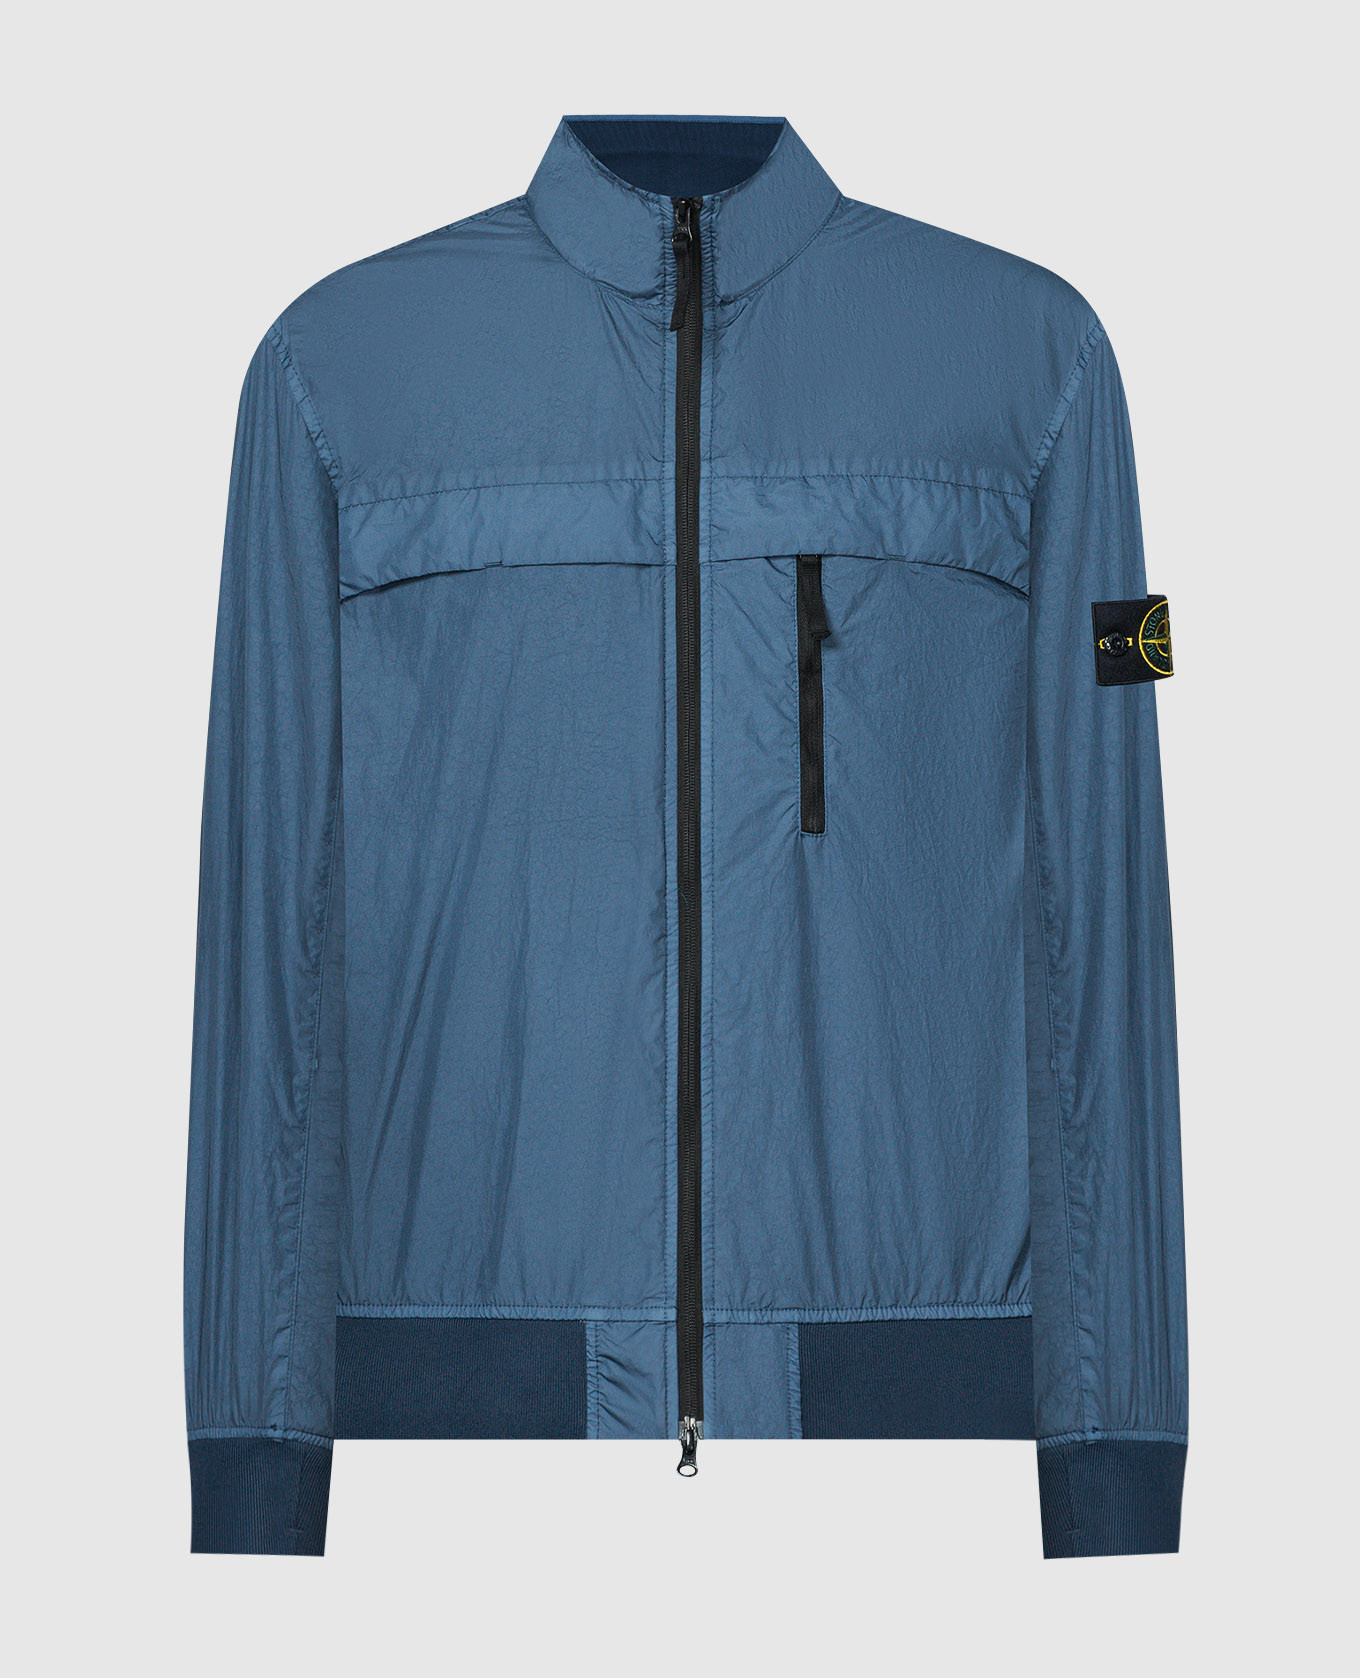 Blue windbreaker with removable logo patch